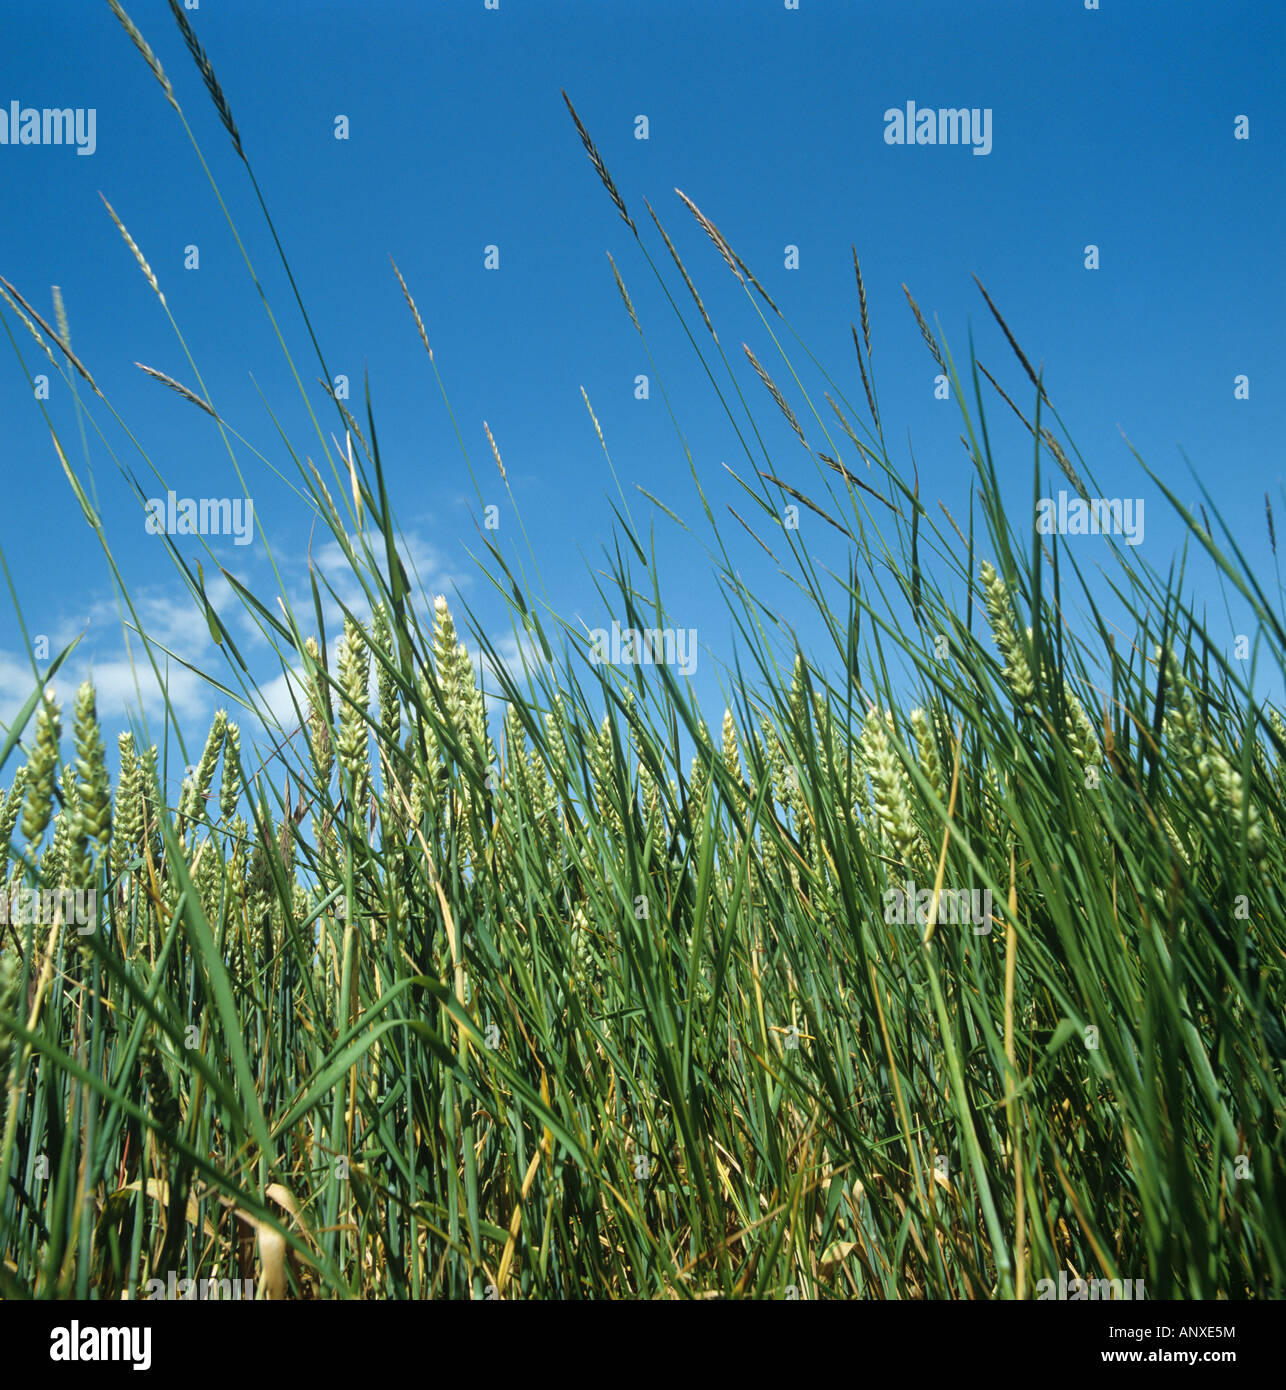 Flowering couch Agropyron repens perennial grass weeds in a wheat crop in ear Stock Photo